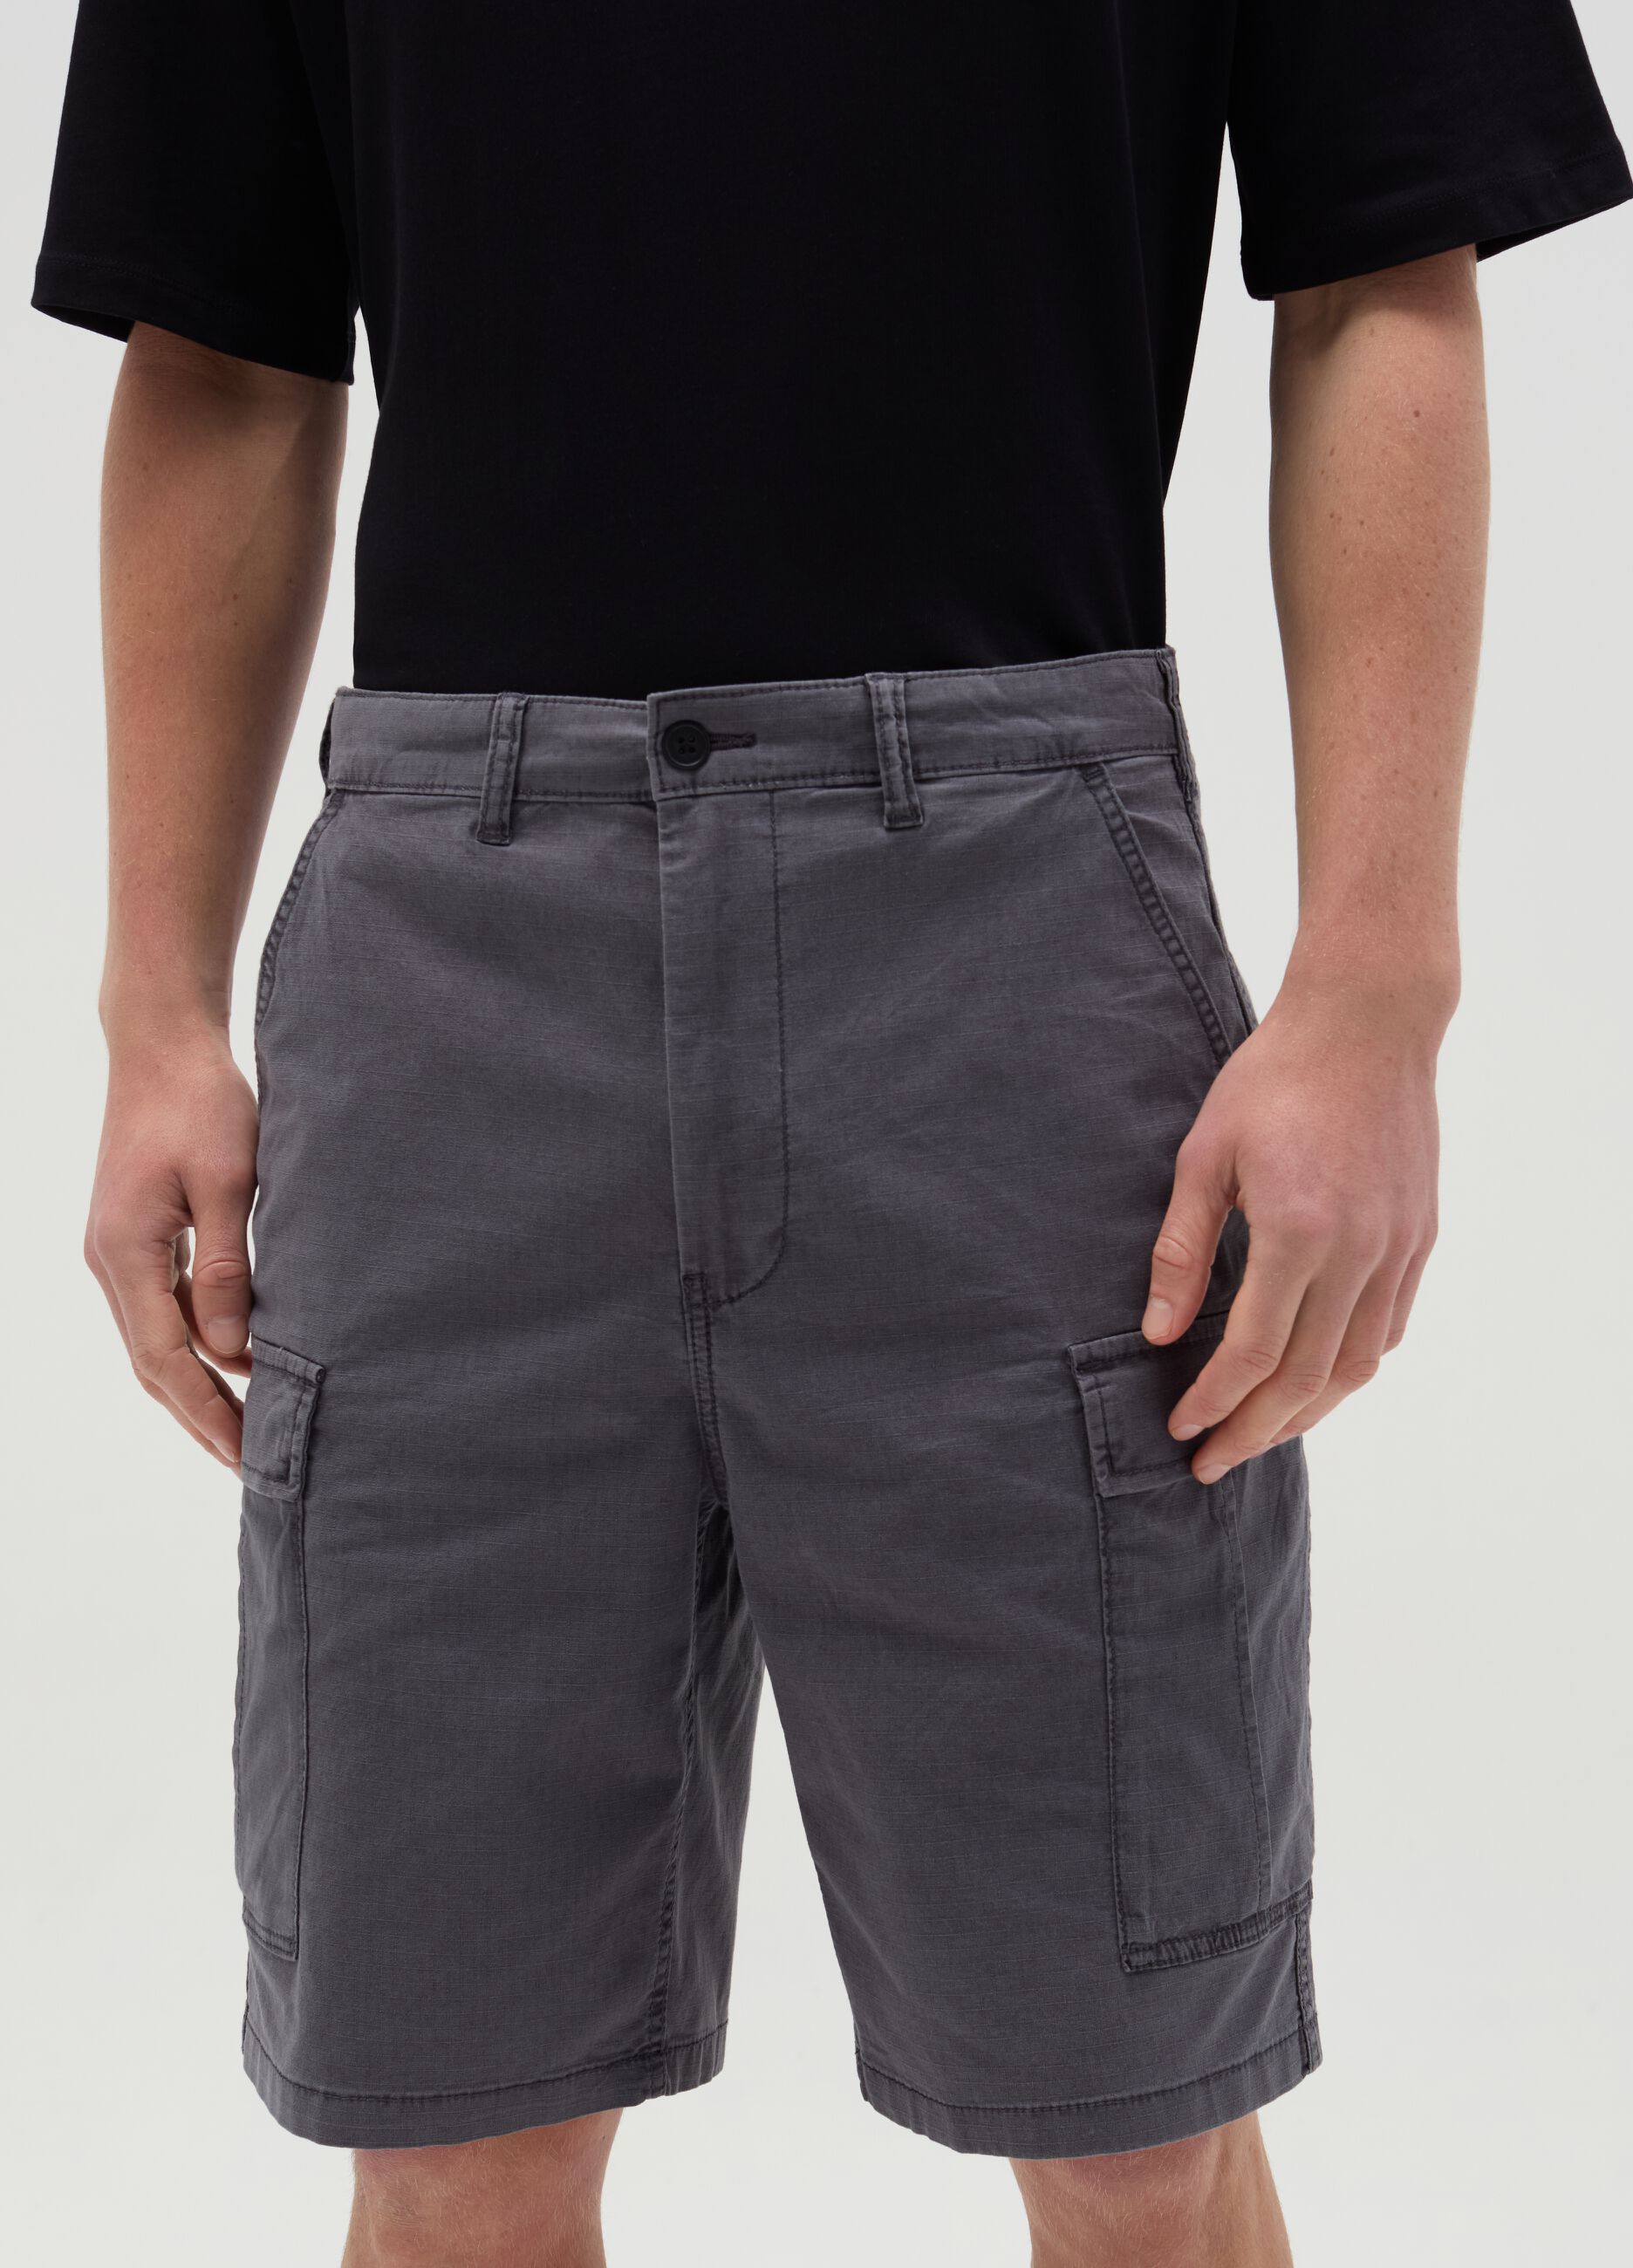 Stretch cargo Bermuda shorts with ripstop weave